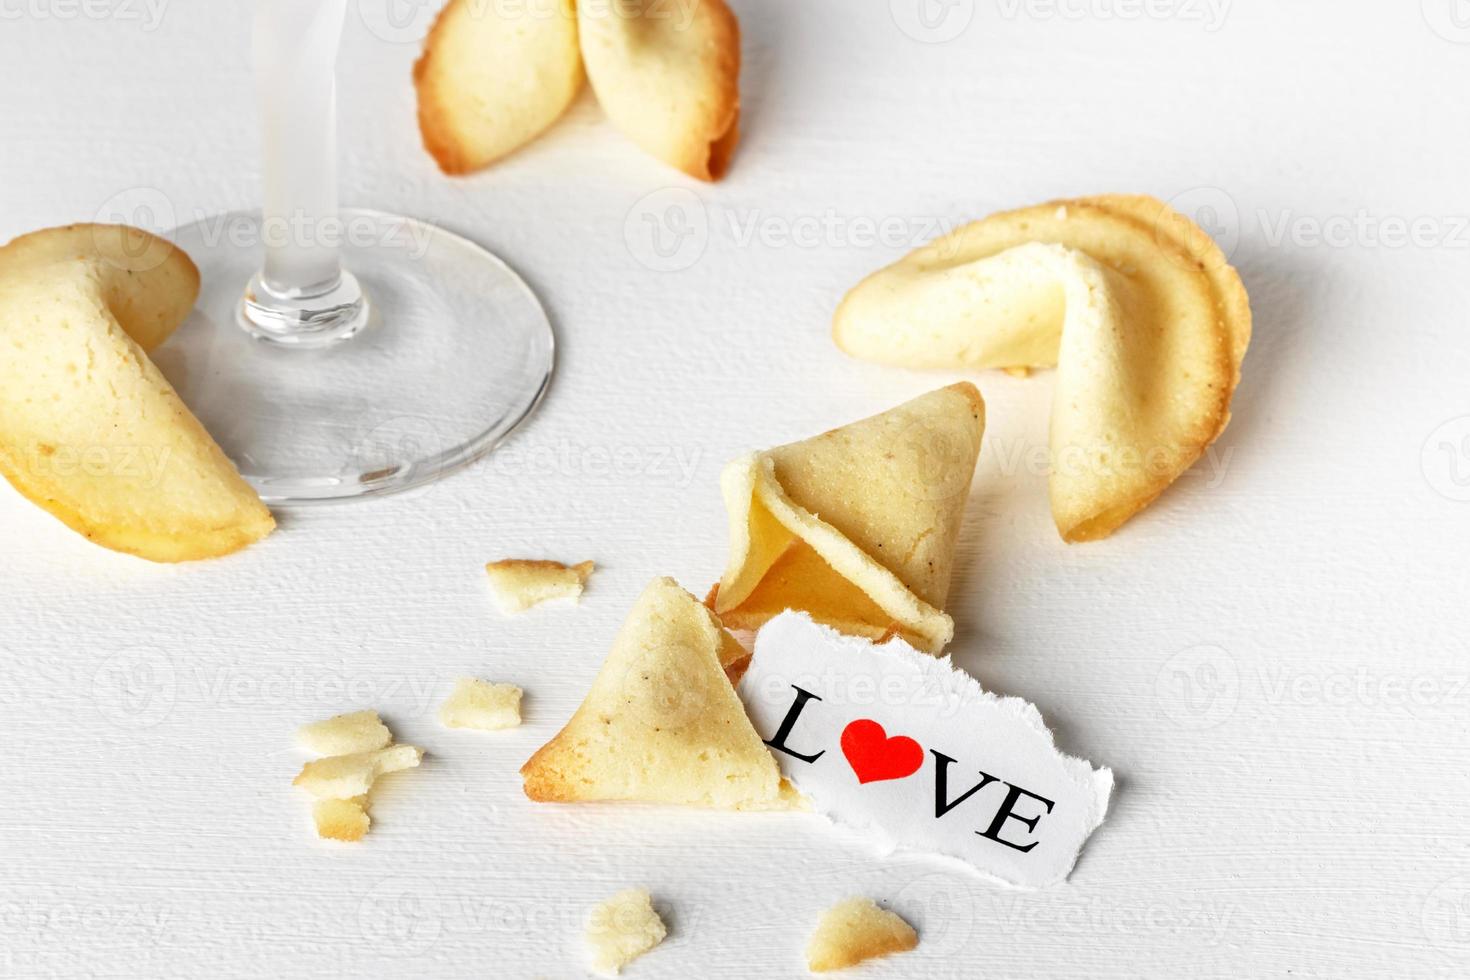 Cookies shaped like tortellini with the word love written on a paper and a glass of champagne.Horizontal image. photo